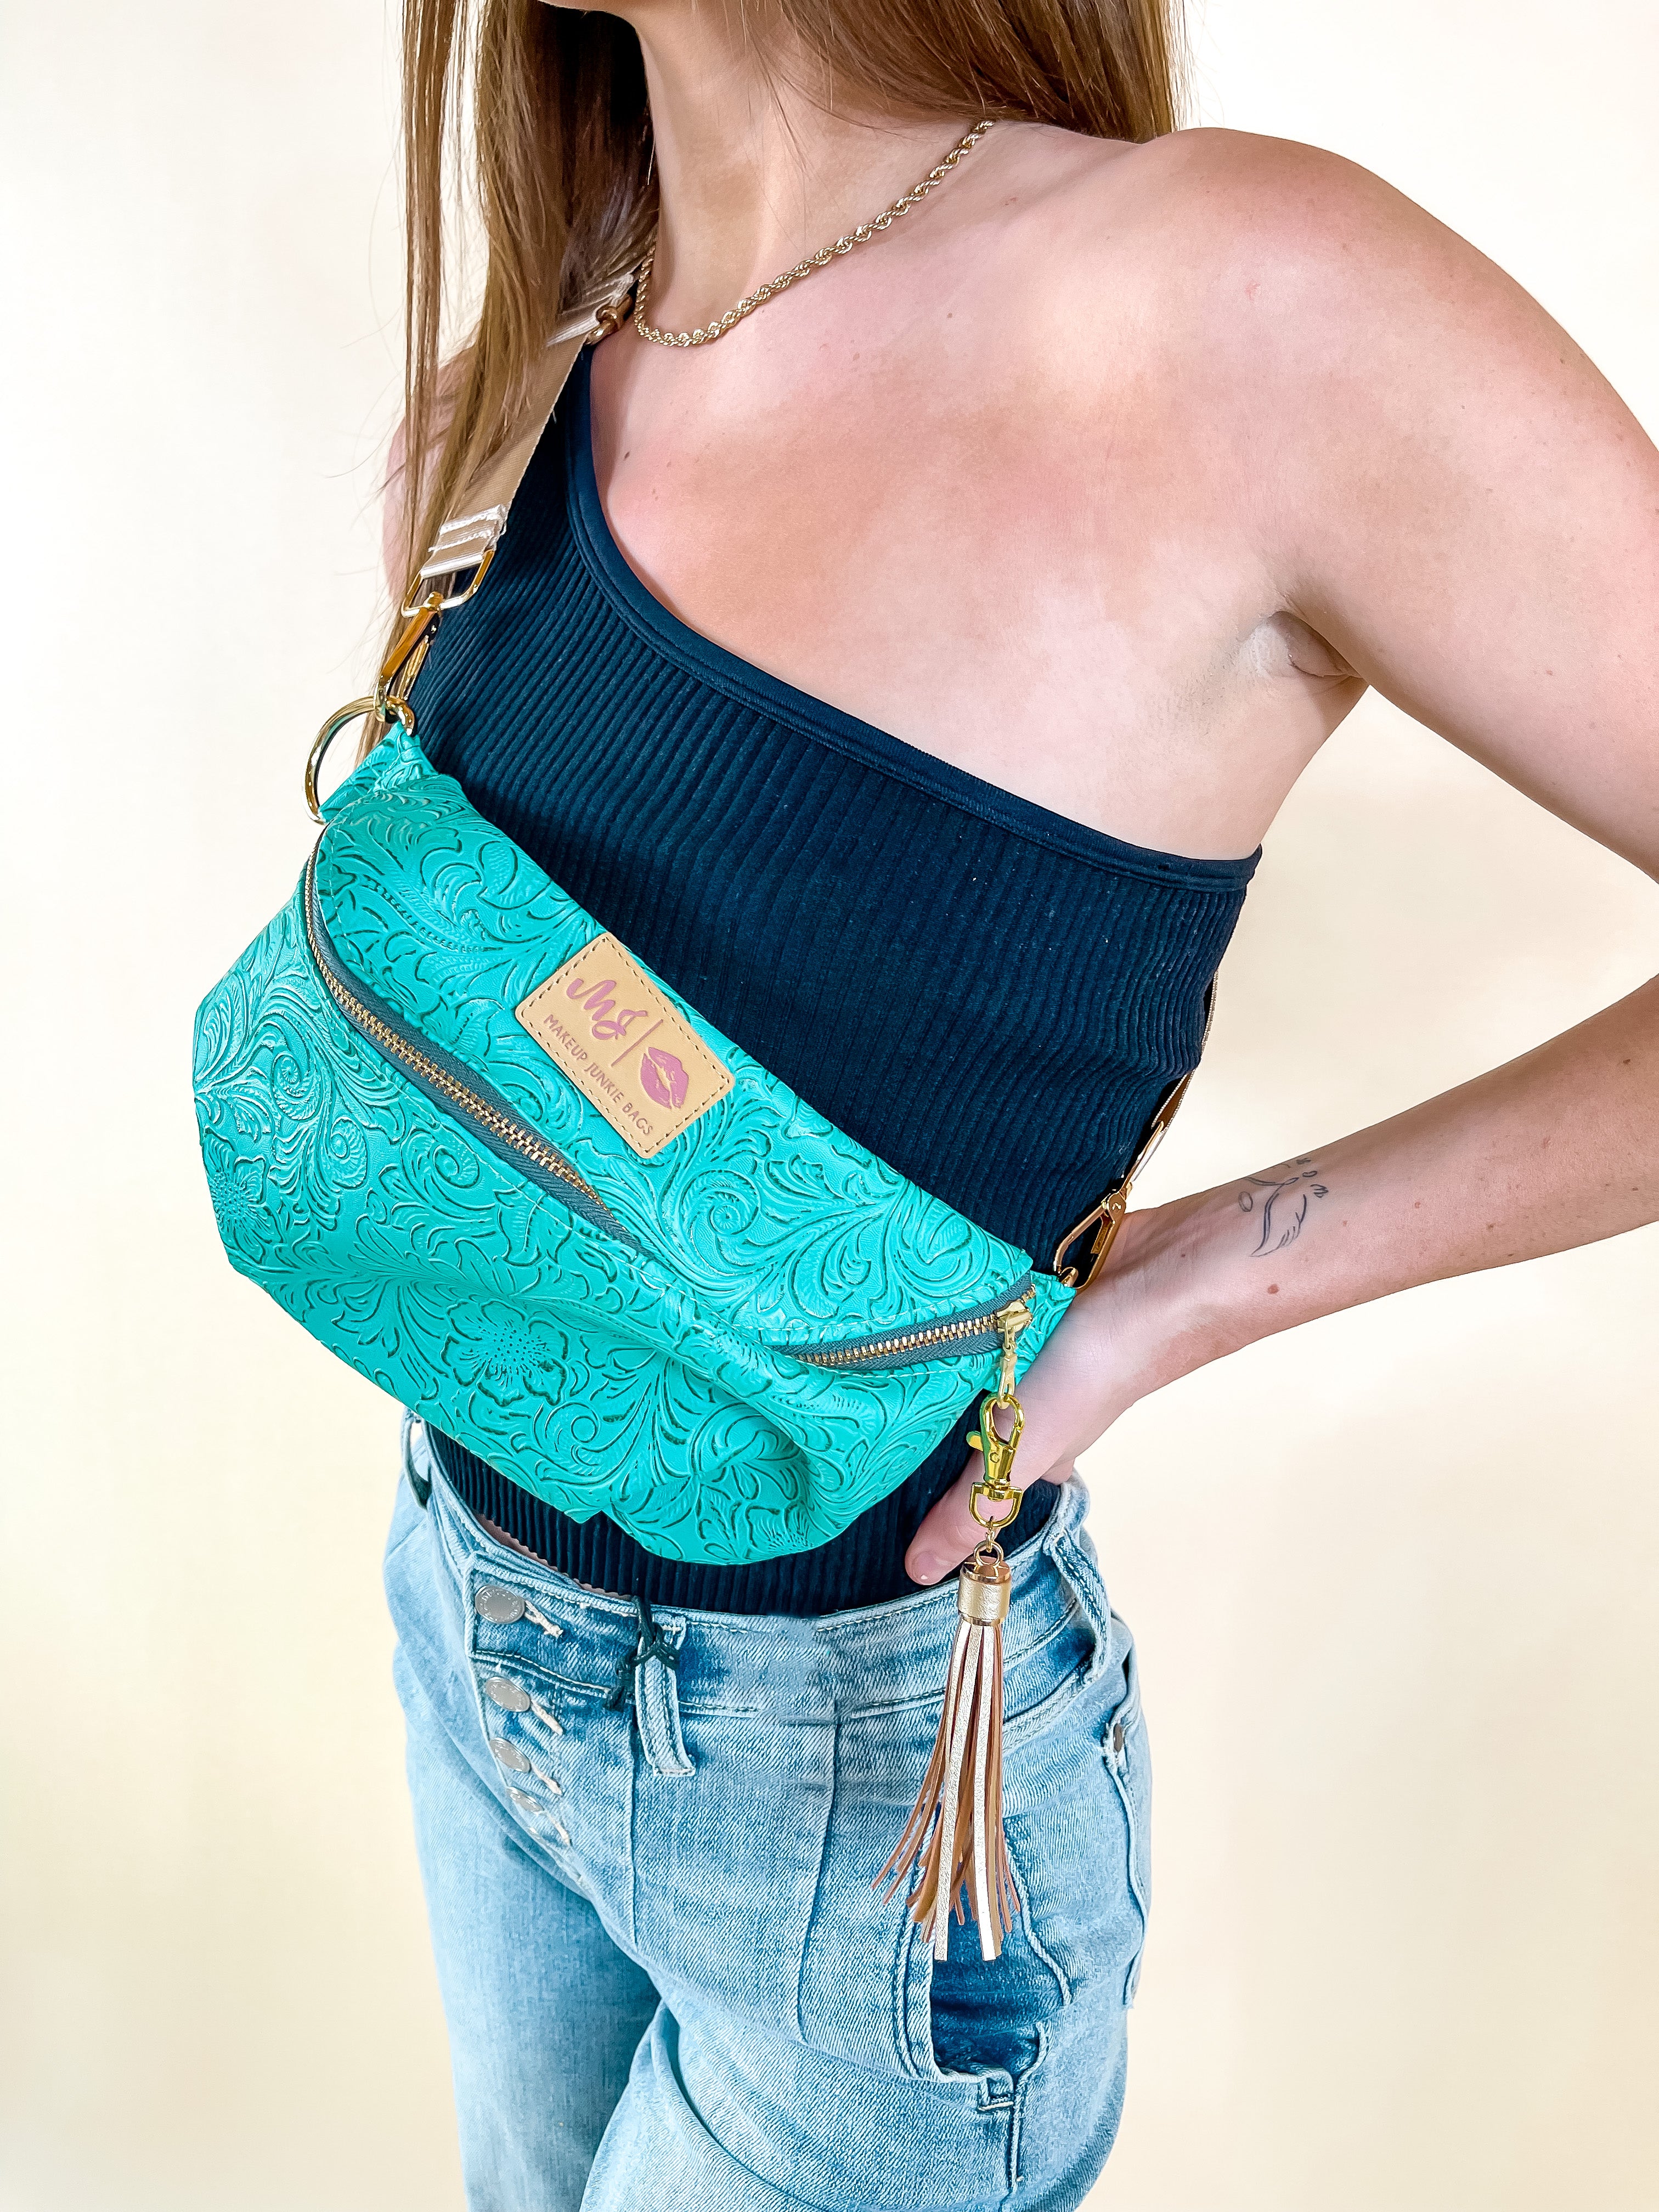 Makeup Junkie | Turquoise Dream Sidekick with Adjustable Strap in Turquoise Tooled Print - Giddy Up Glamour Boutique